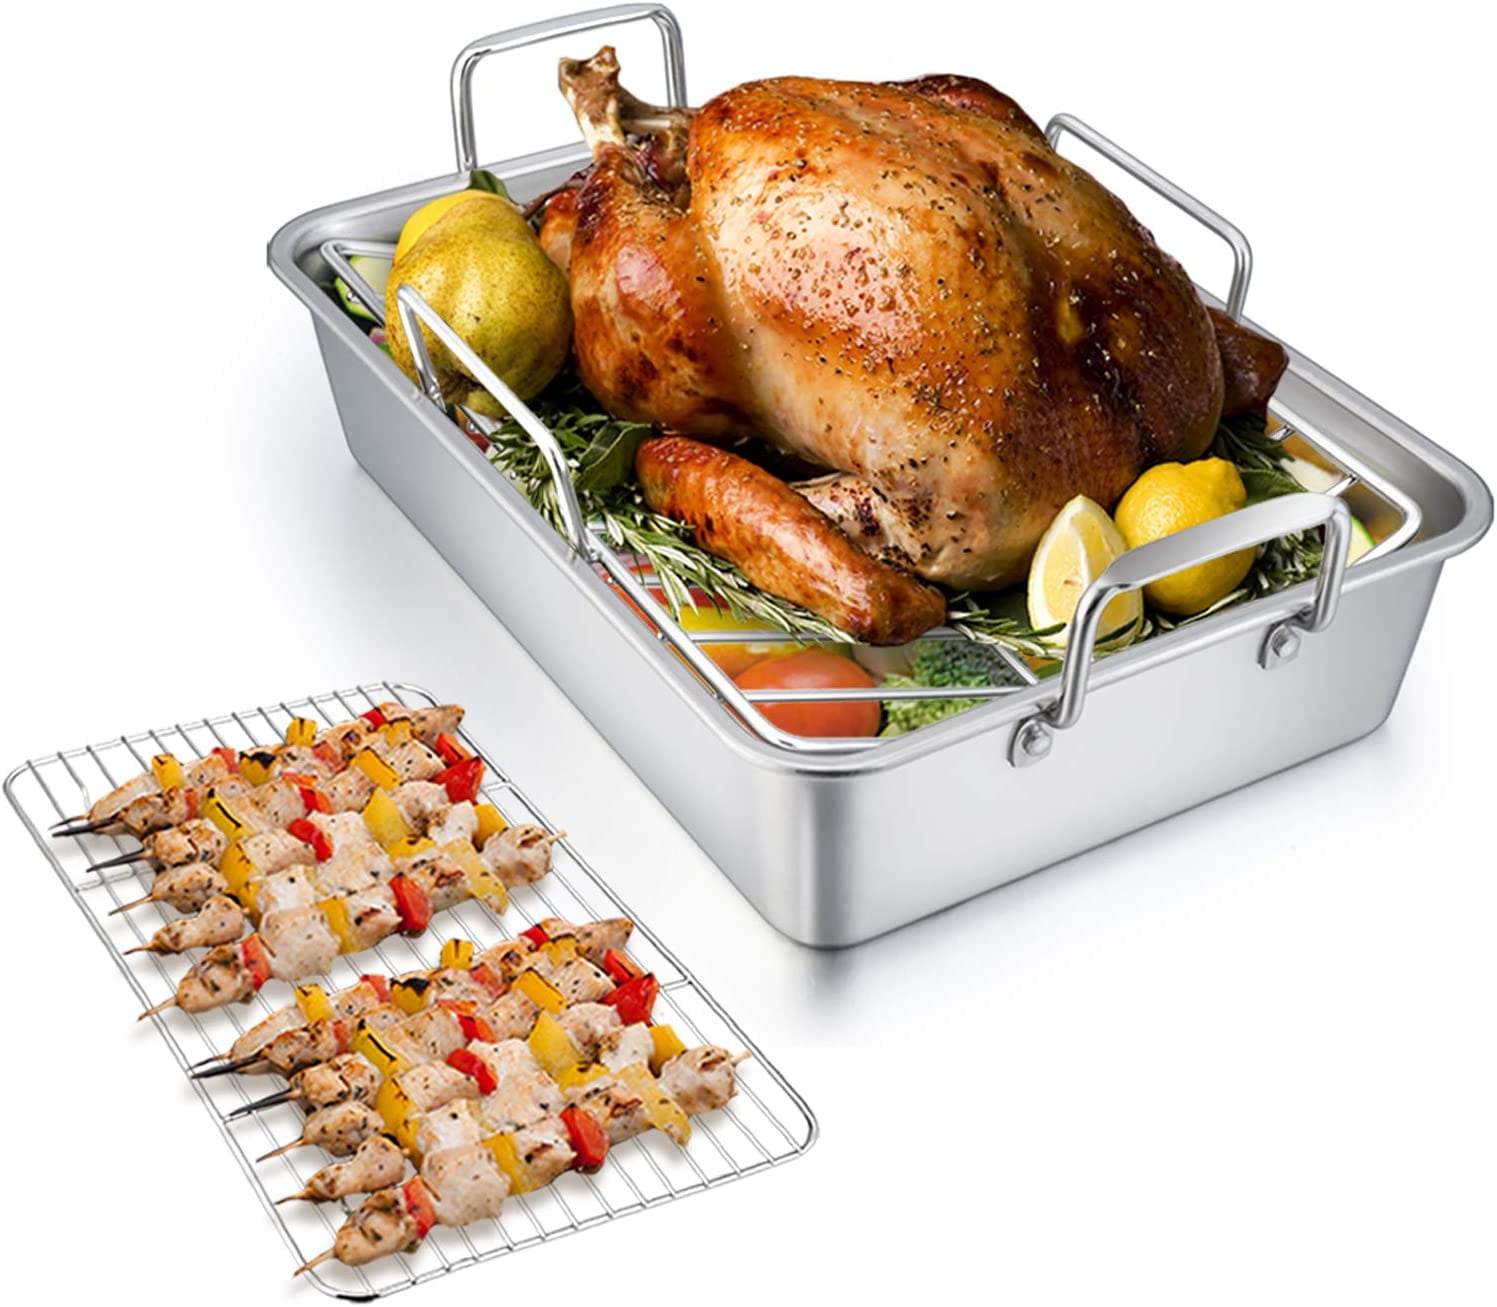 16” Roaster Roasting Pan with Baking Rack and V-shaped Rack, P&P CHEF  Stainless Steel Rectangular Lasagna Pan with Handles for Turkey Chicken,  Heavy